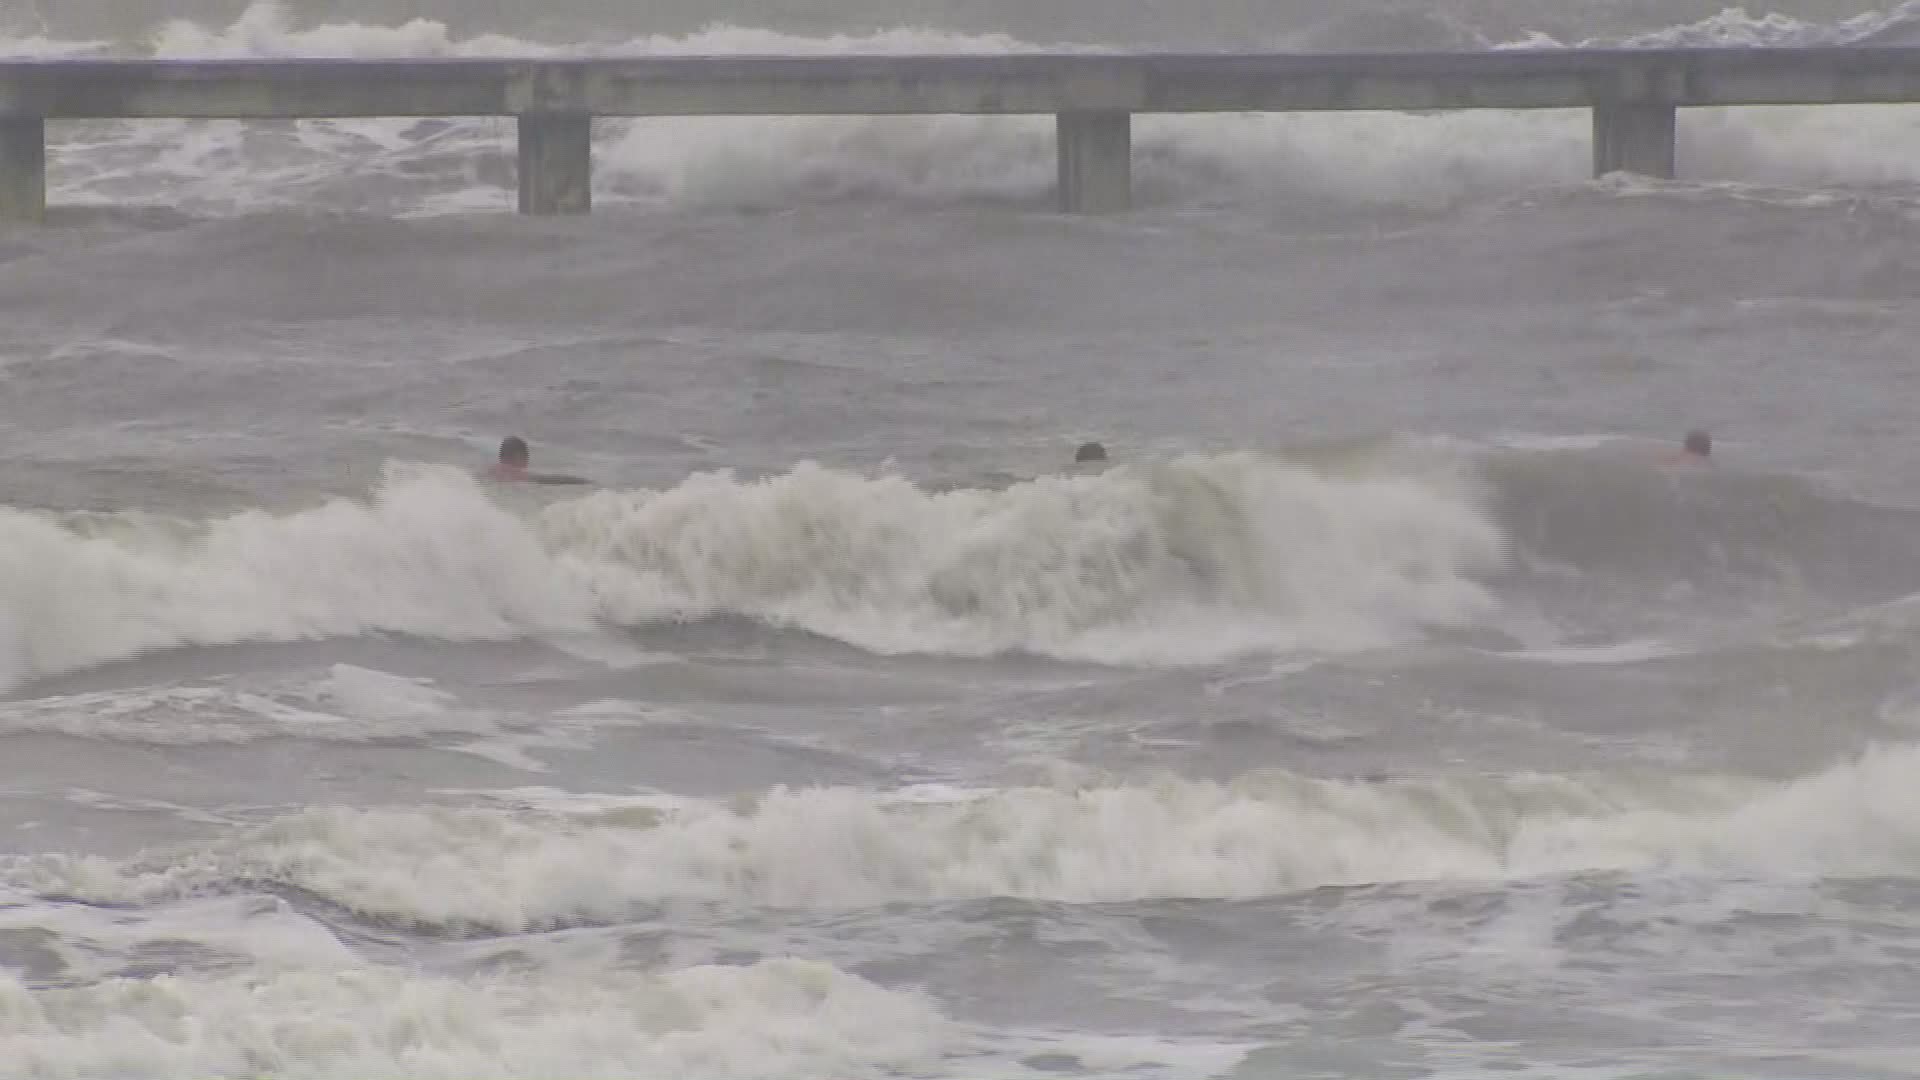 As the outer bands of Tropical Storm Imelda lash Galveston Island and the Gulf Coast of Texas, surfers brave the choppy waves. The latest models show some spots could see 12 to 24 inches of rain.